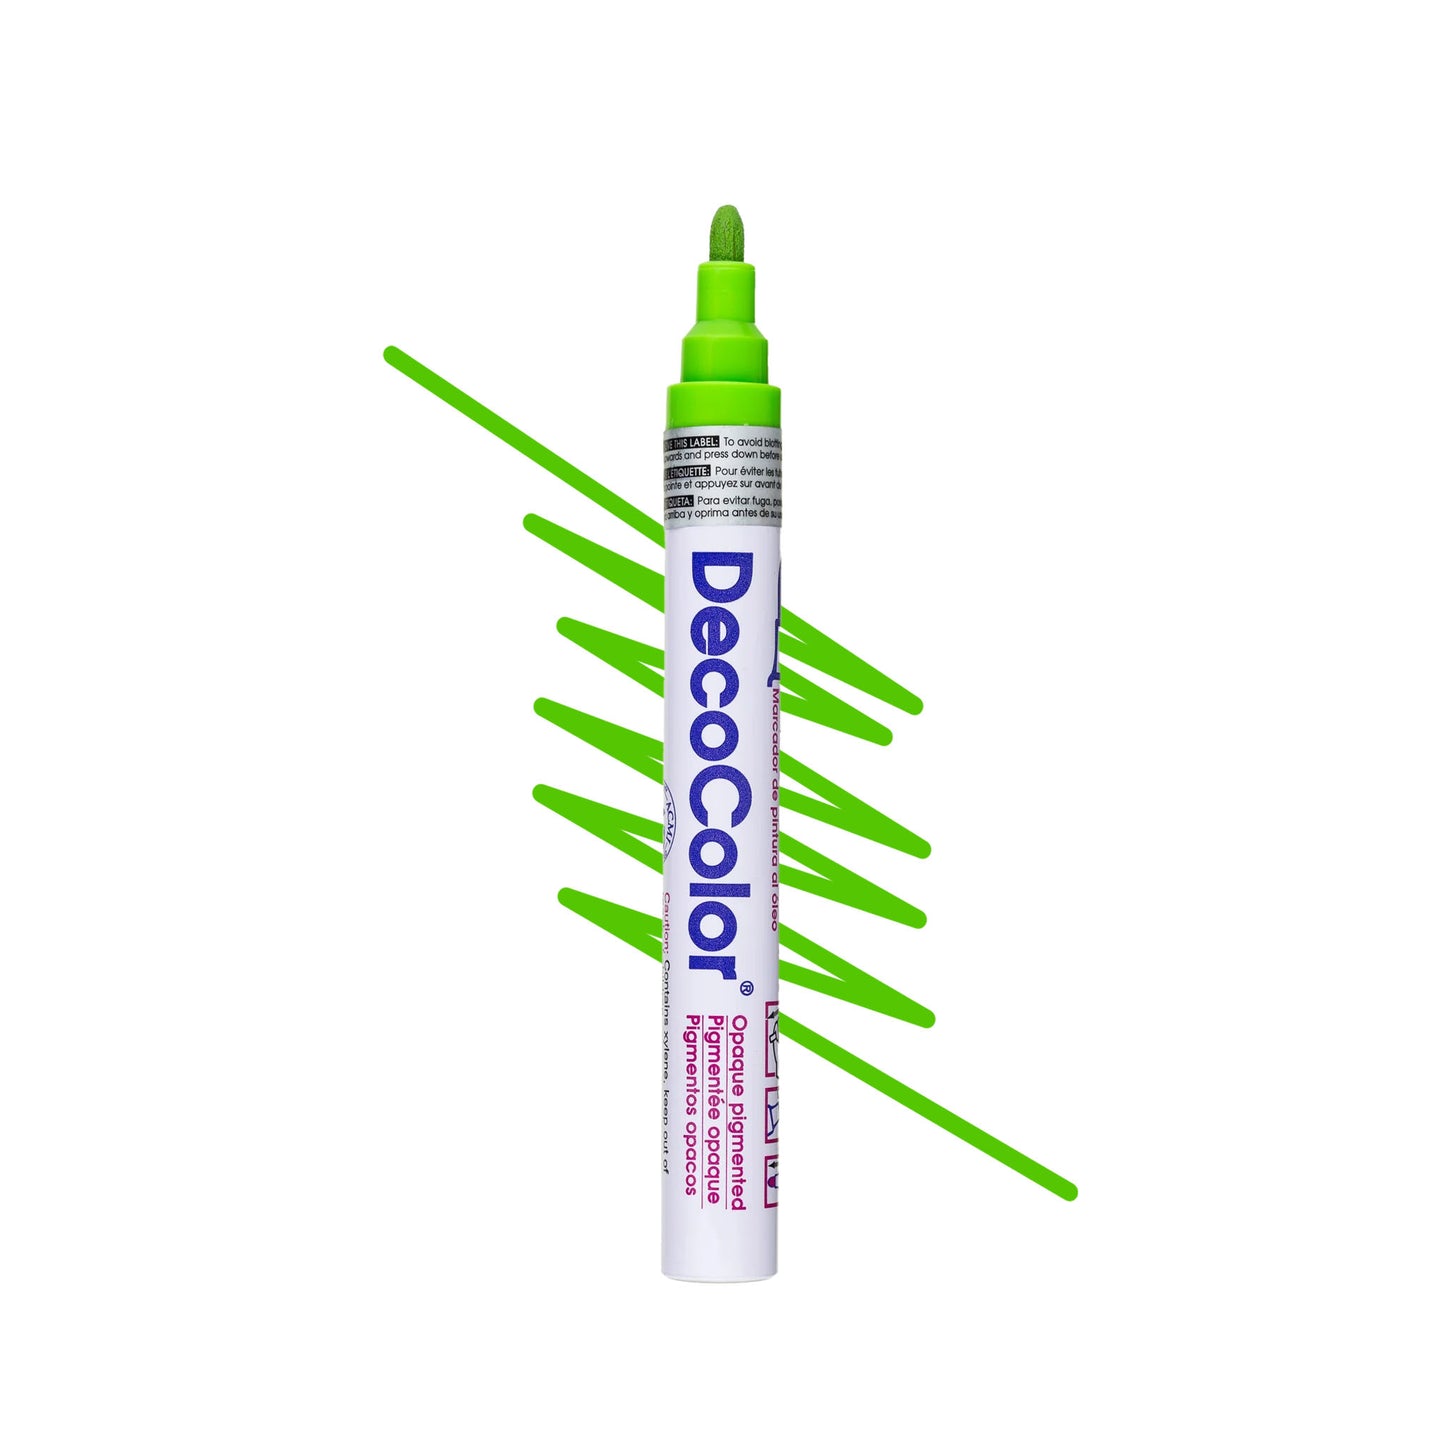 Deco Color artist paint markers in light green.